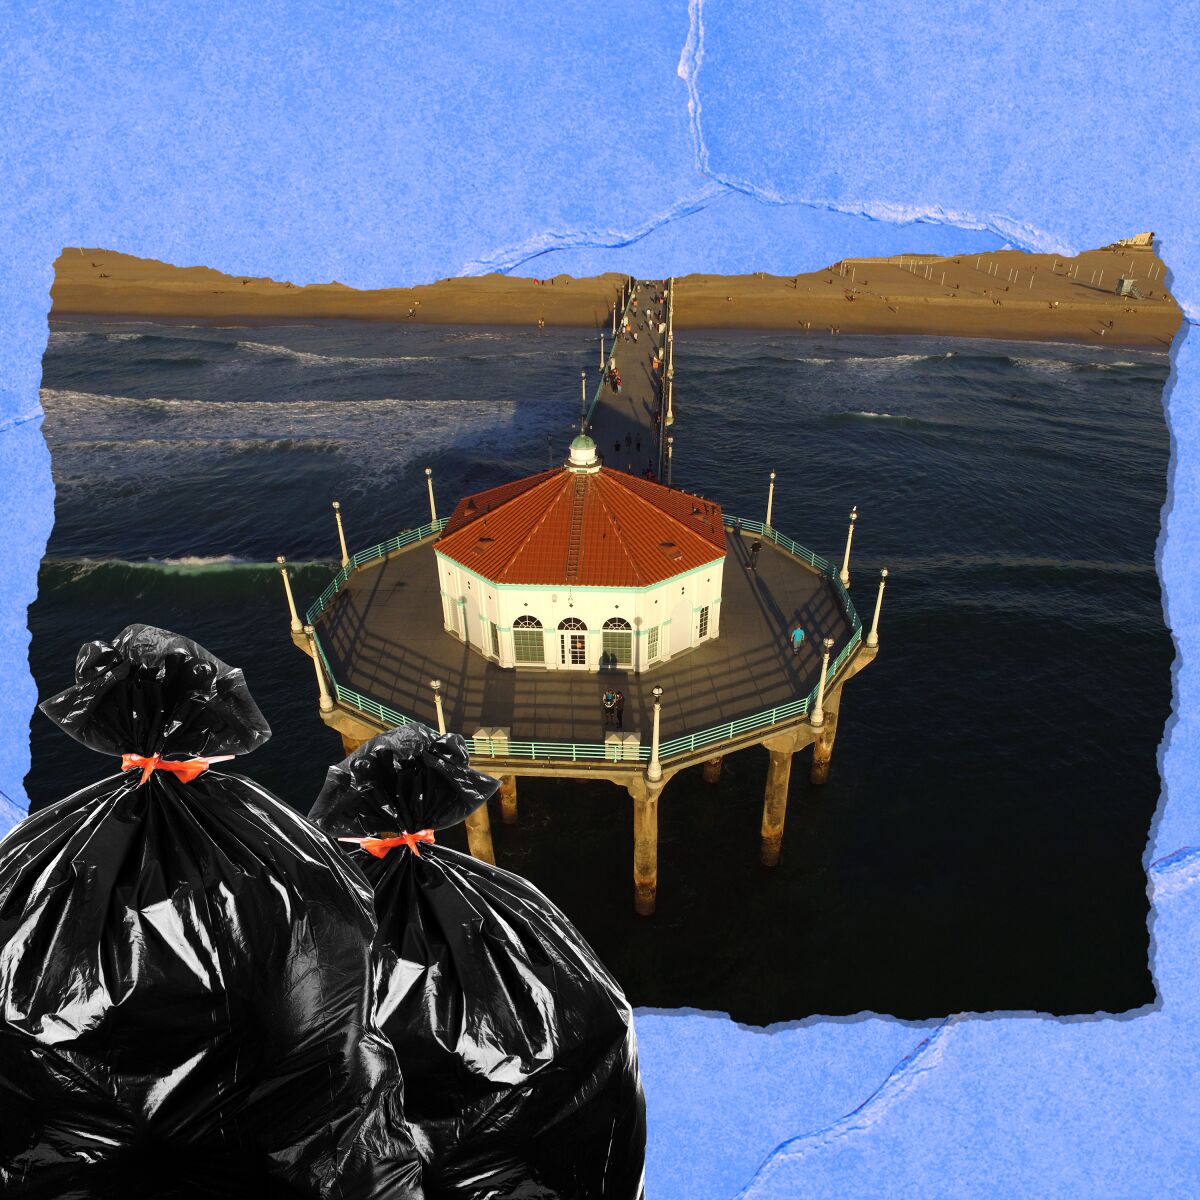 A round building on a pier; in the foreground are trash bags.